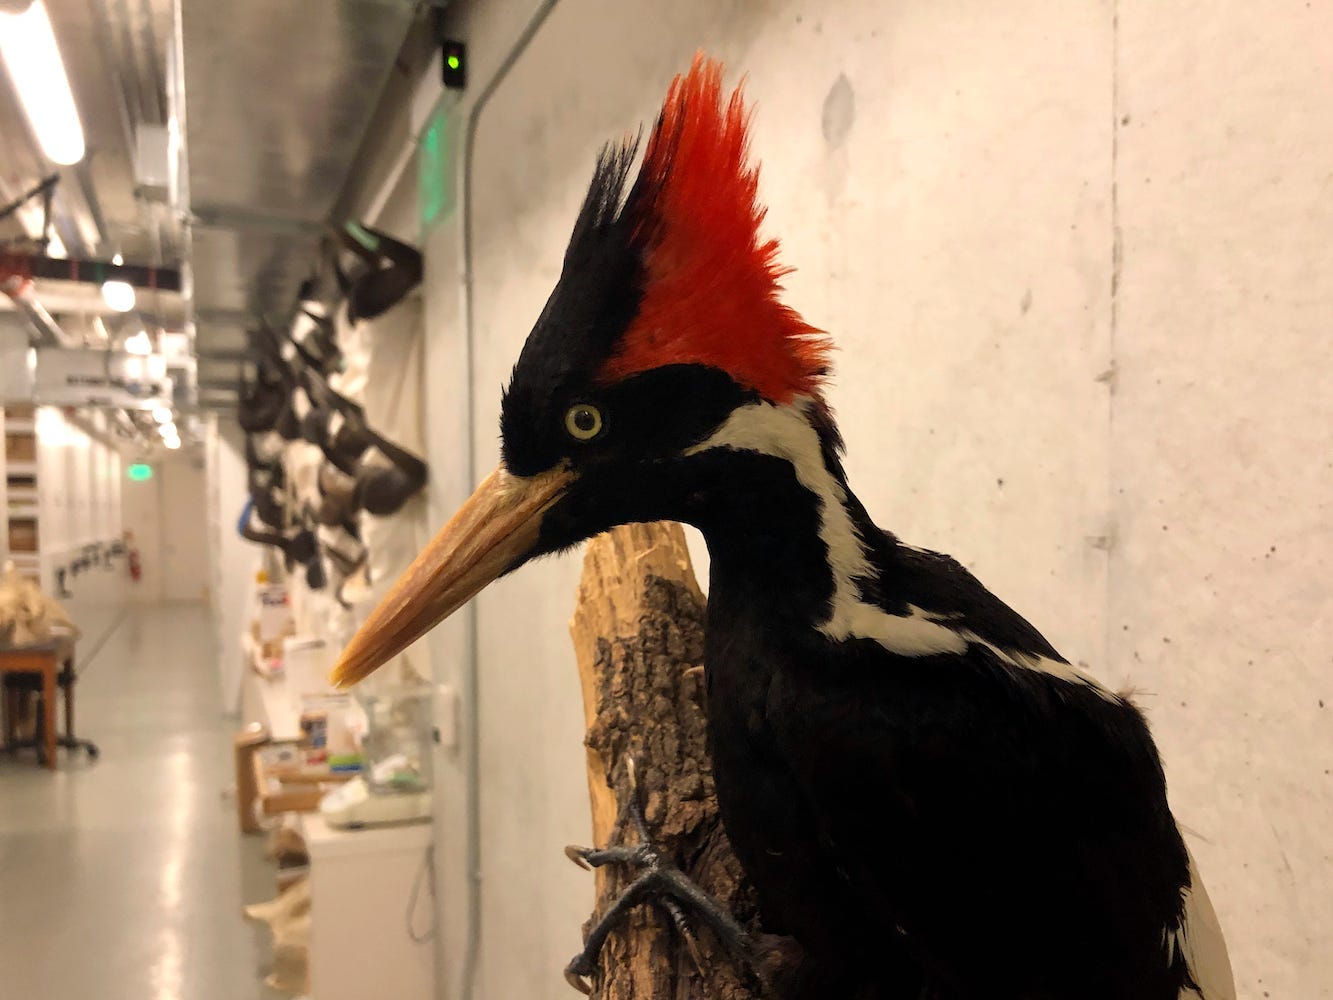 An ivory-billed woodpecker specimen is on a display at the California Academy of Sciences in San Francisco, Friday, Sept. 24, 2021.